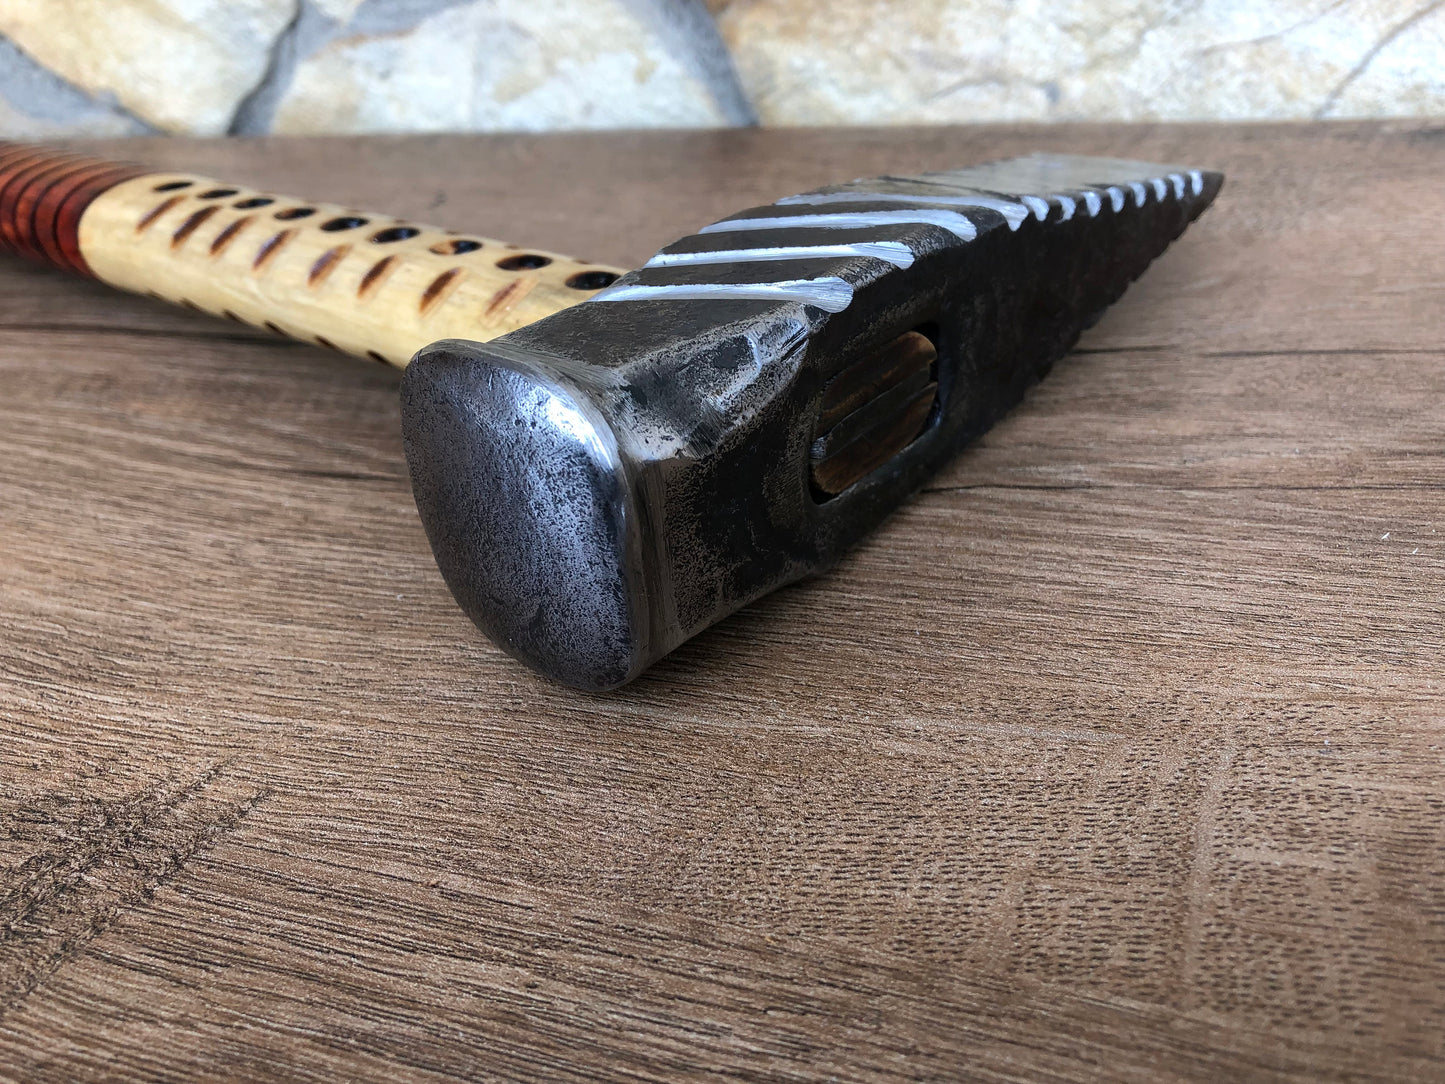 Hammer, blacksmith hammer, hand crafted hammer, fathers day gift, gift for Dad, handyman tool, handyman gift, iron anniversary gift, tools